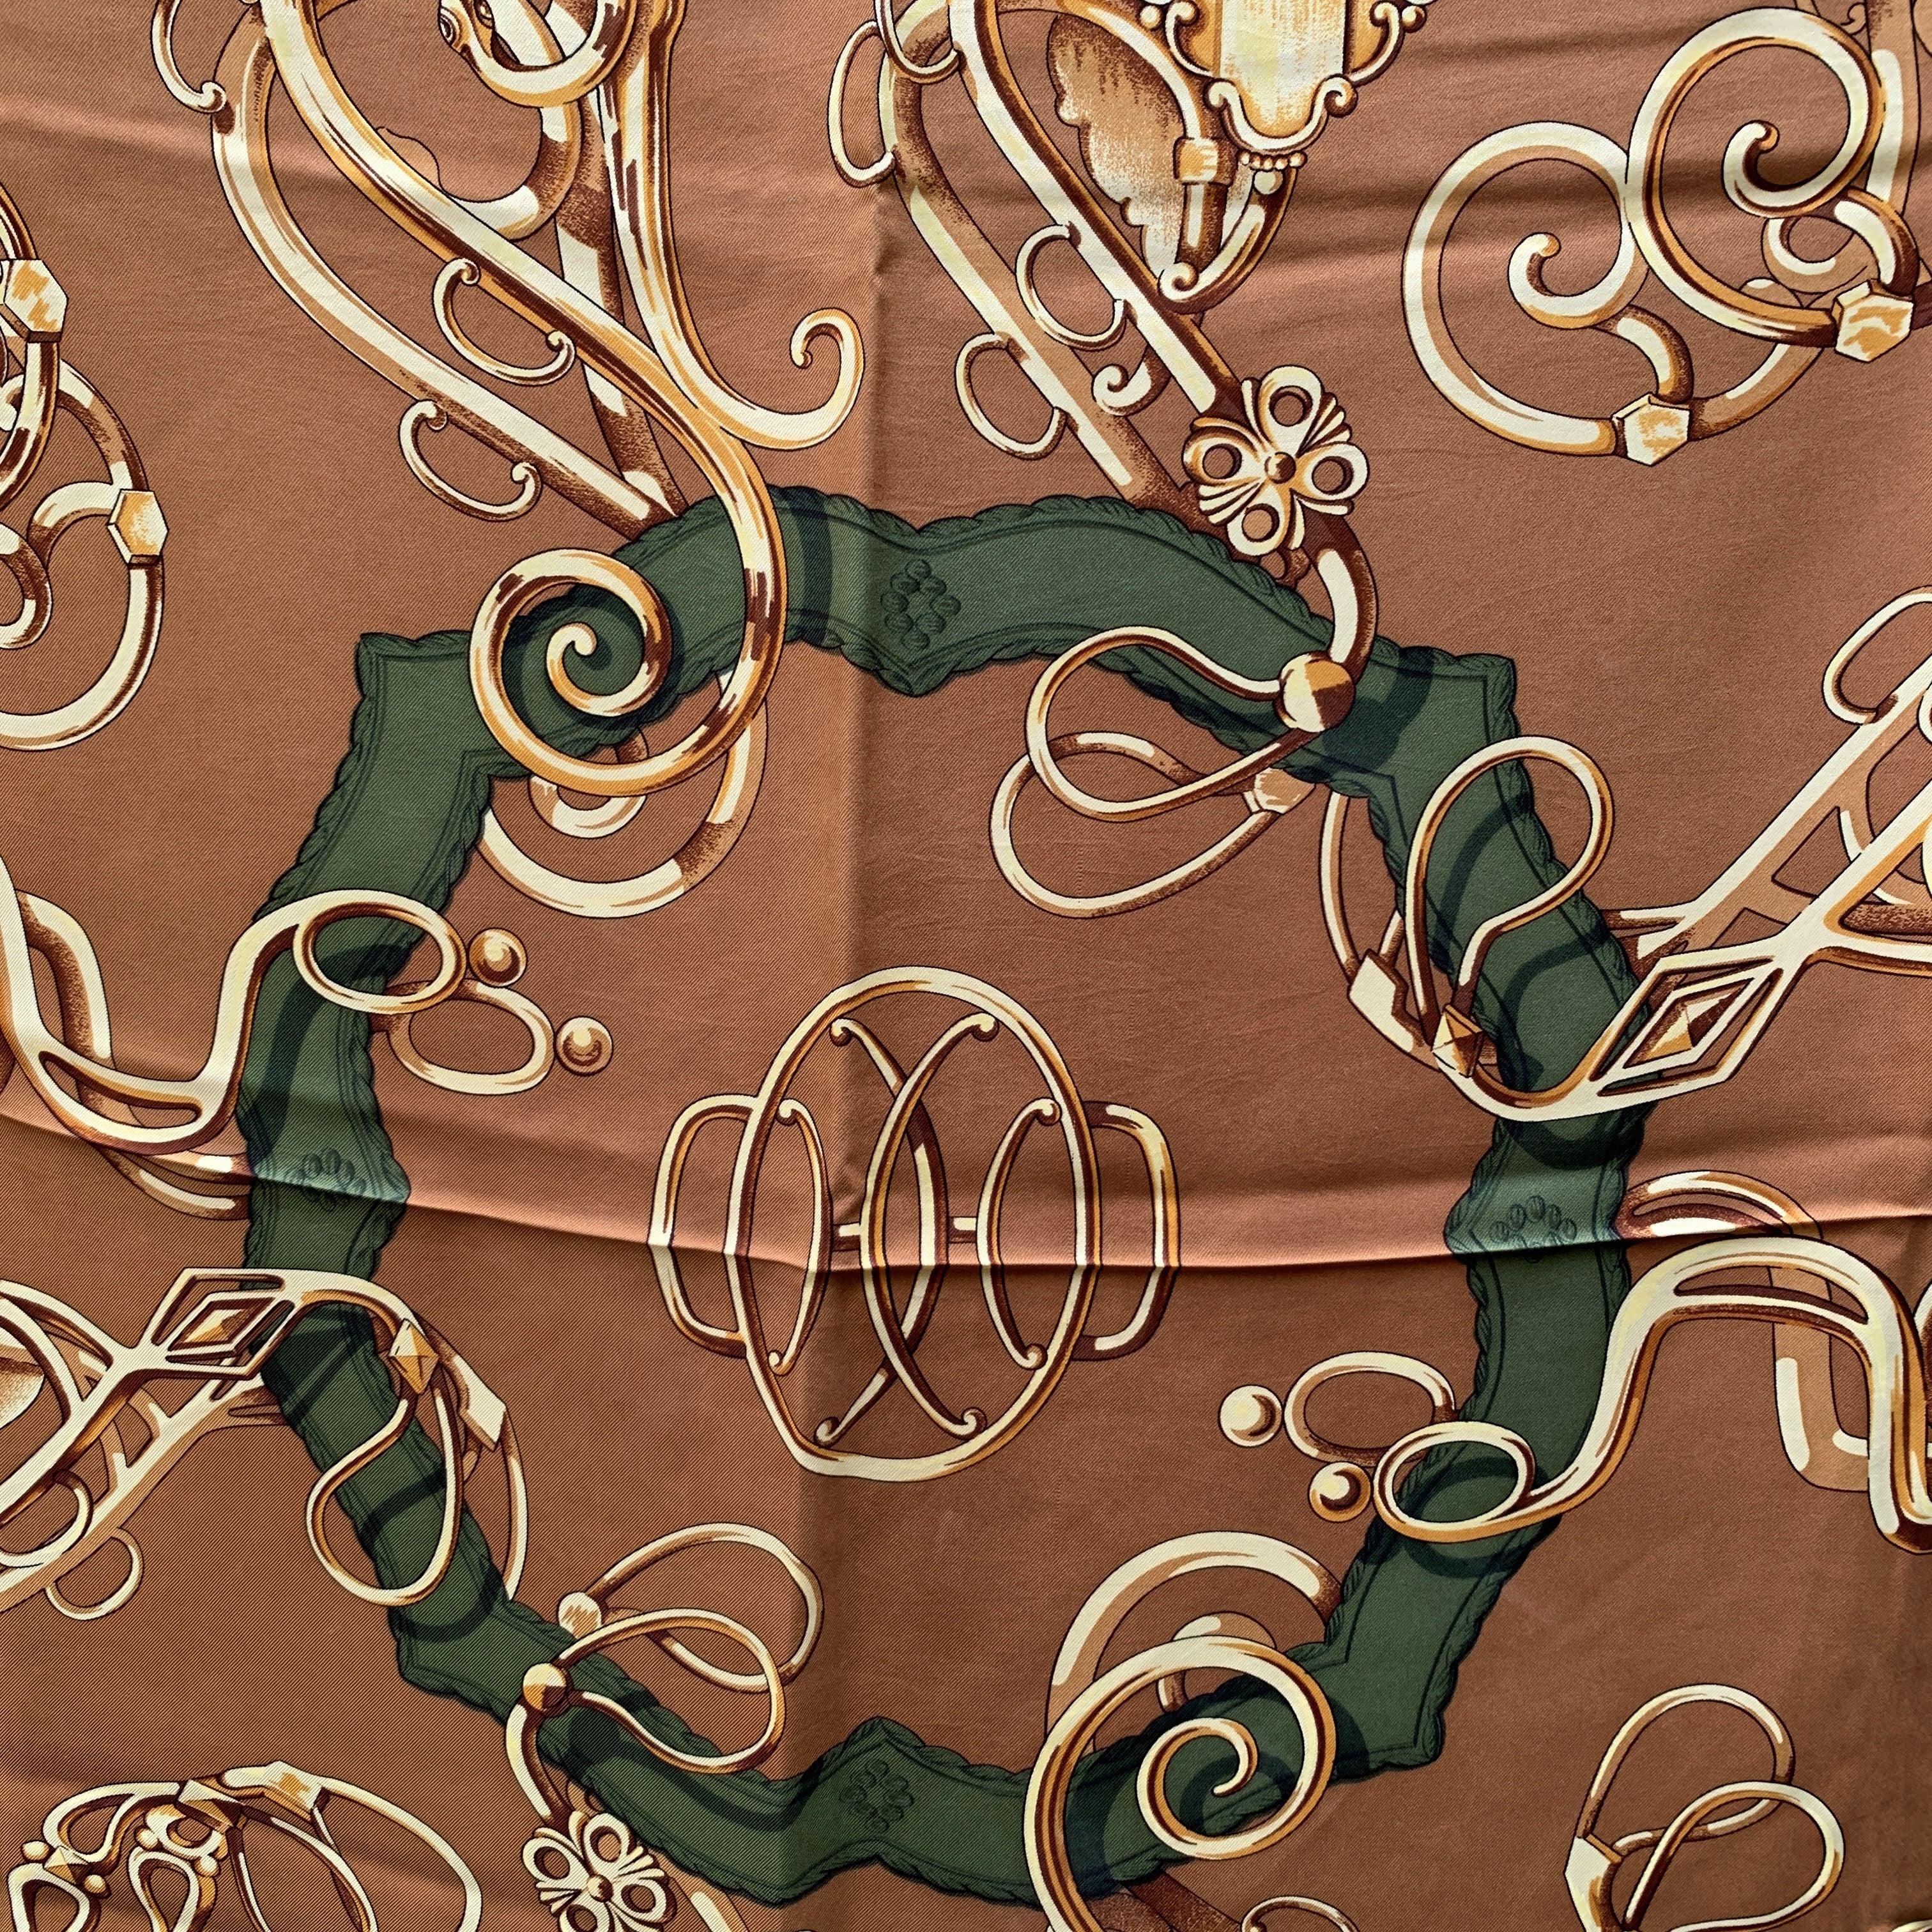 HERMES scarf 'Profile Selliere ' by Maurice Guillemot, originally issued in 1974 and reissued in 1984.Equestrian theme in a tan colorway. The 'Hermes Paris' logo is located on the center bottom Details MATERIAL: Silk COLOR: Beige MODEL: Profile